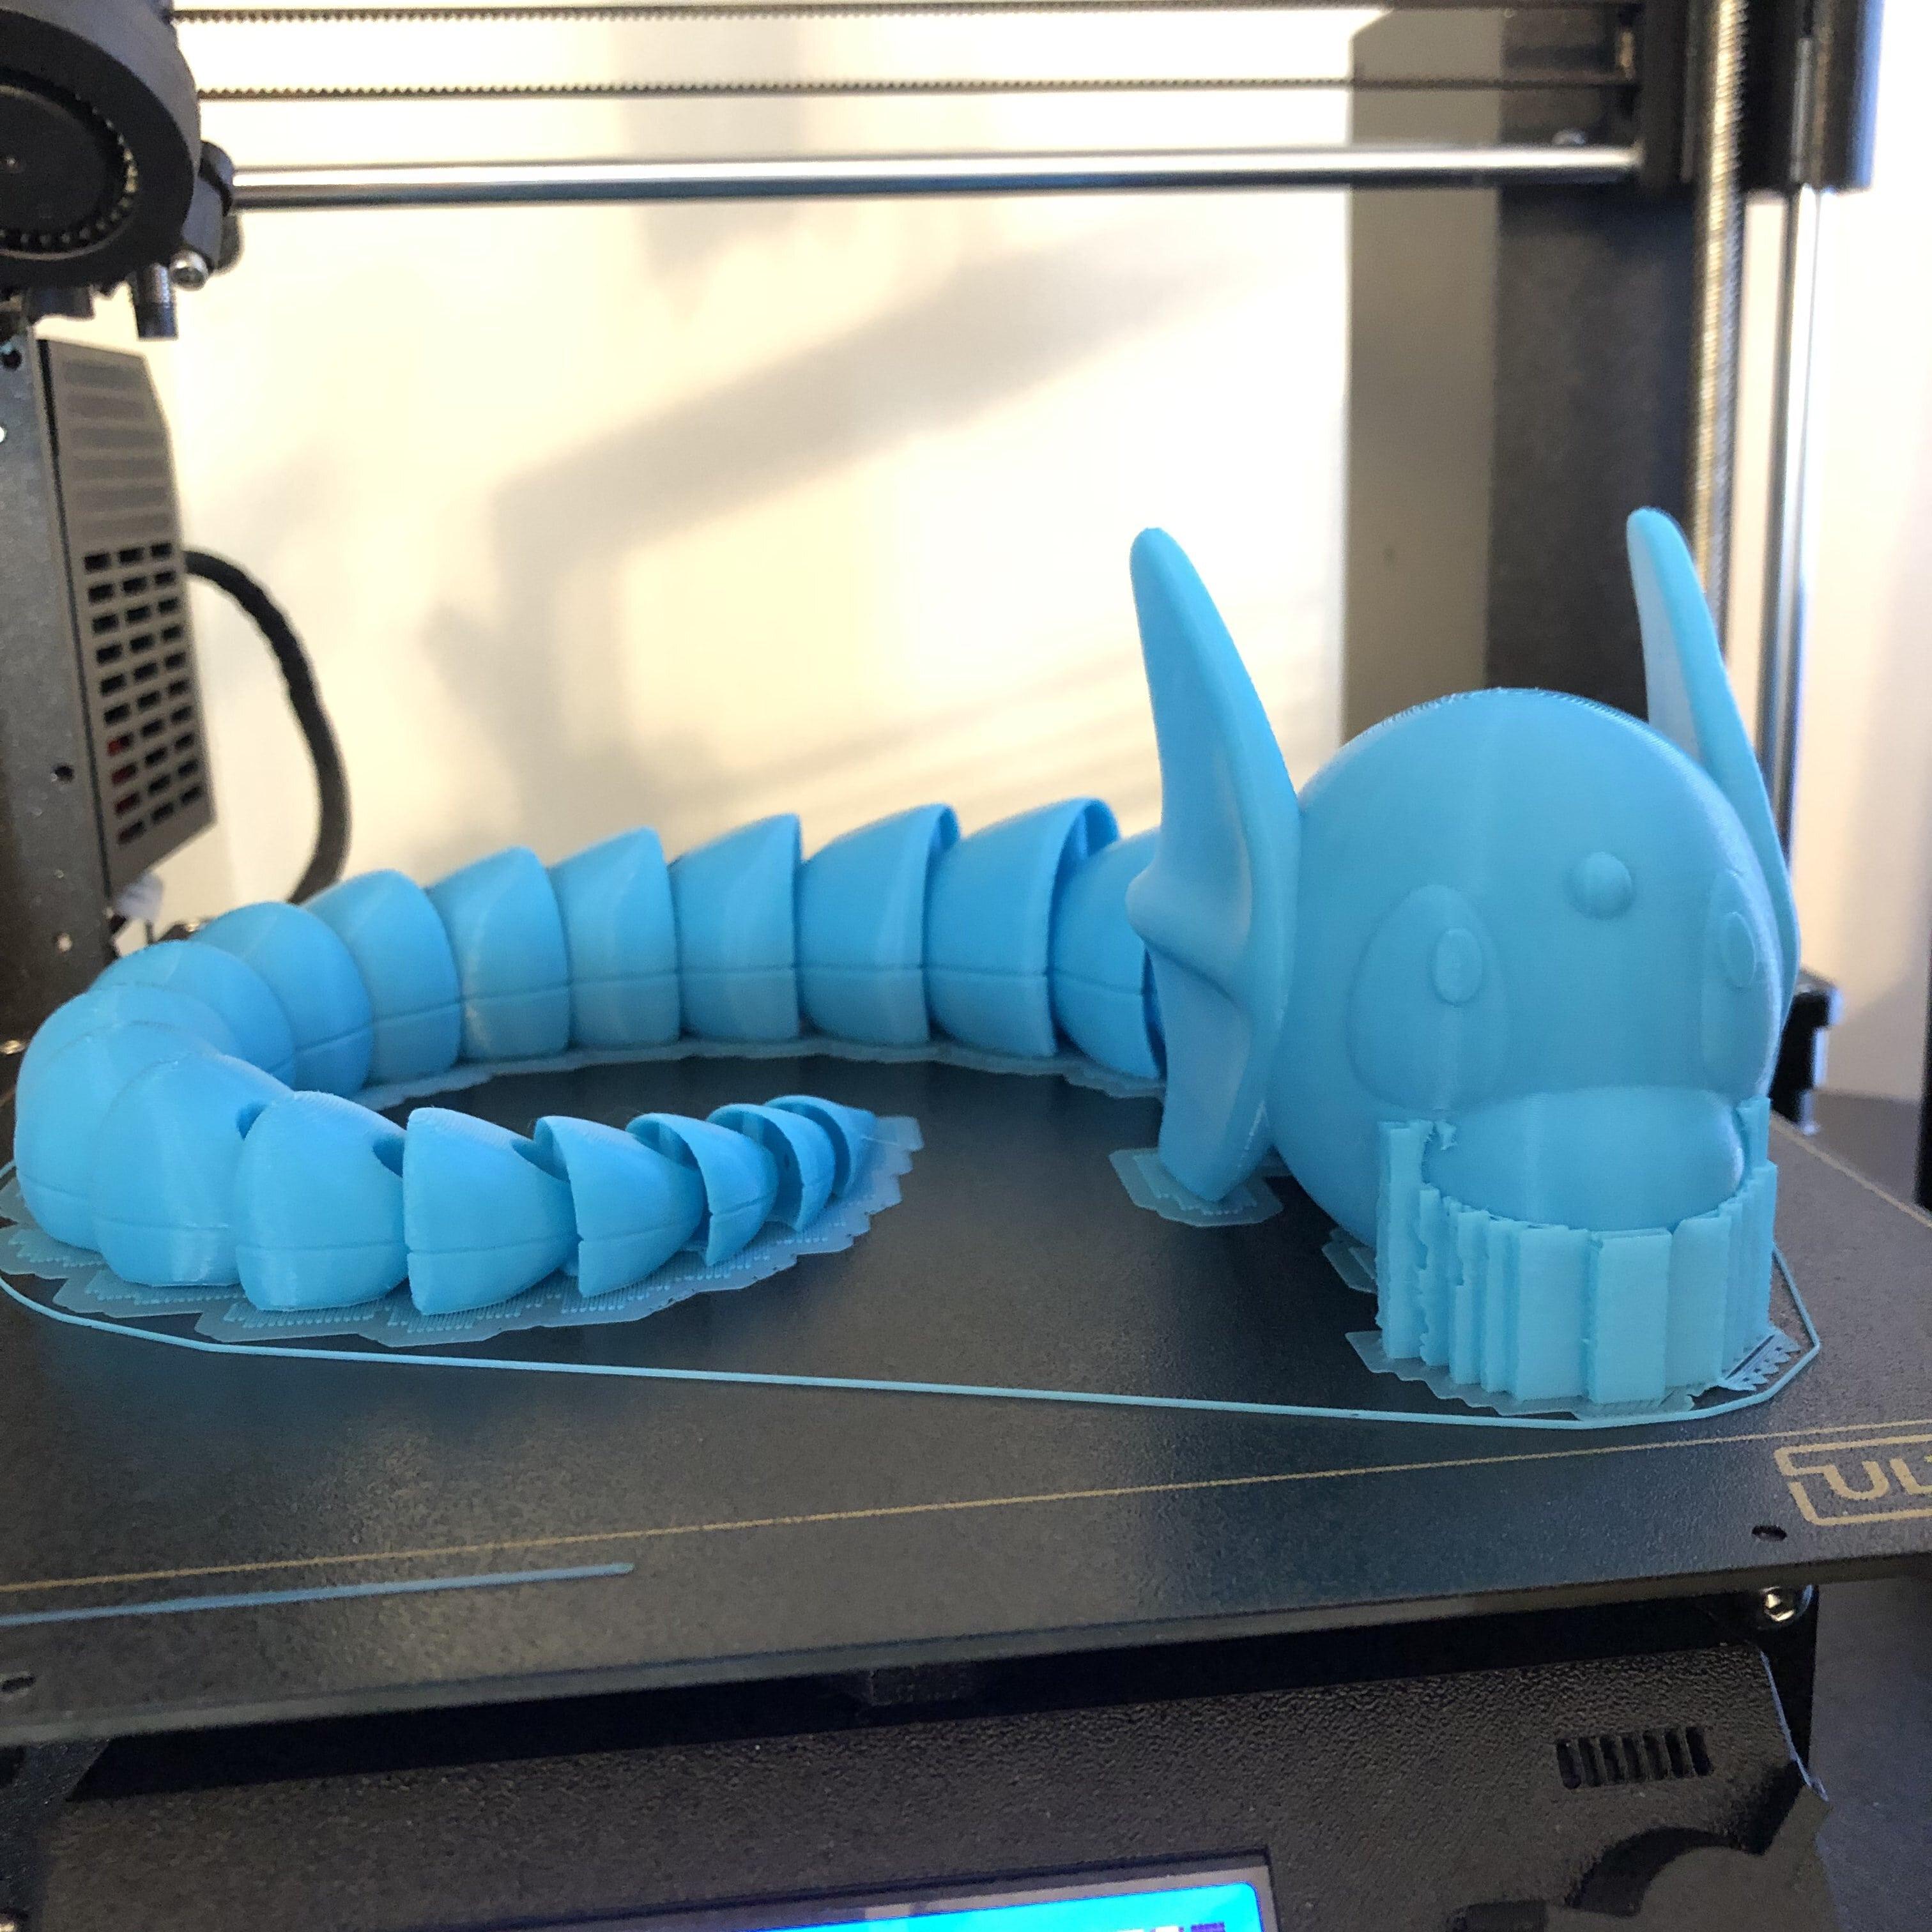 Dratini (Pokemon)- Print-In-Place Flexi - Dratini printed on Prusa Mk3s. .2mm layer height and a .4mm nozzle. Printed in Matterhackers Light Blue PLA. - 3d model